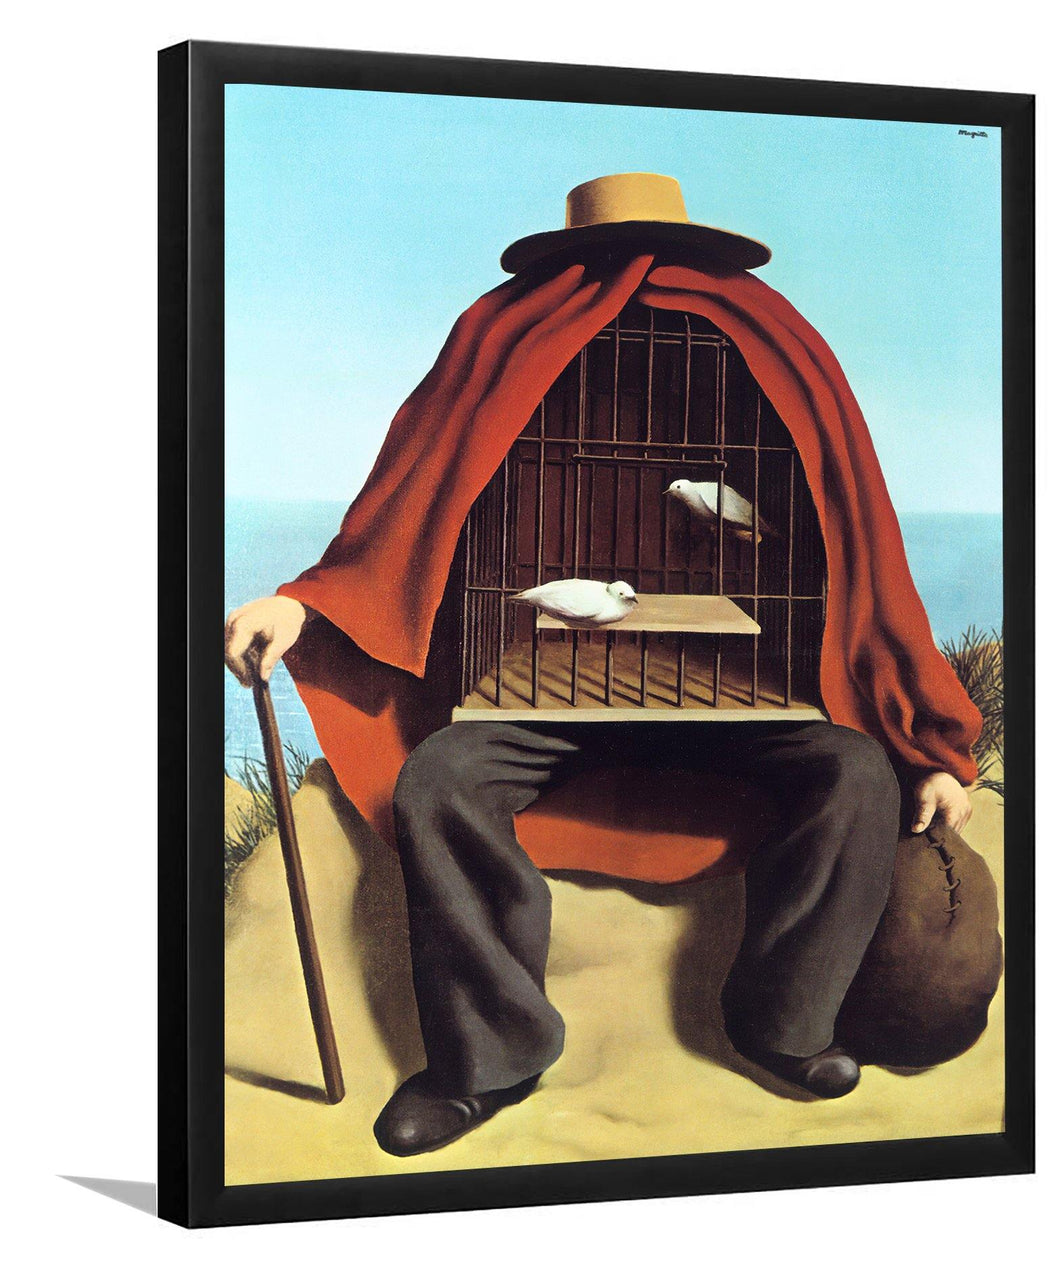 The Therapeutist 1937 by Rene Magritte-Art Print, Frame Art, Plexiglas Cover